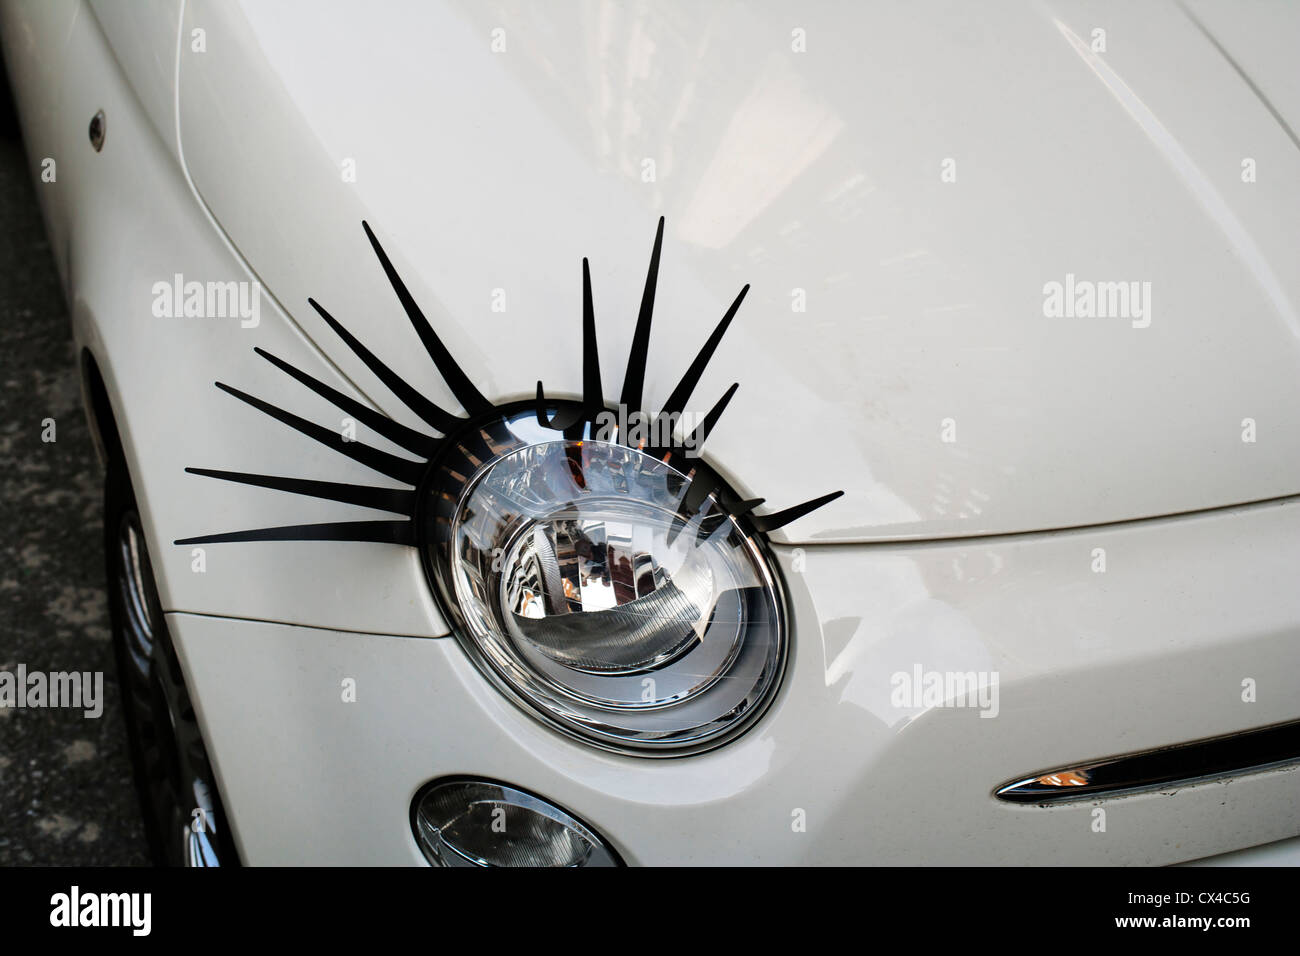 Cute Eye-lashes accessories on Fiat Cinquecento, Melcome Street, London, England, UK Stock Photo